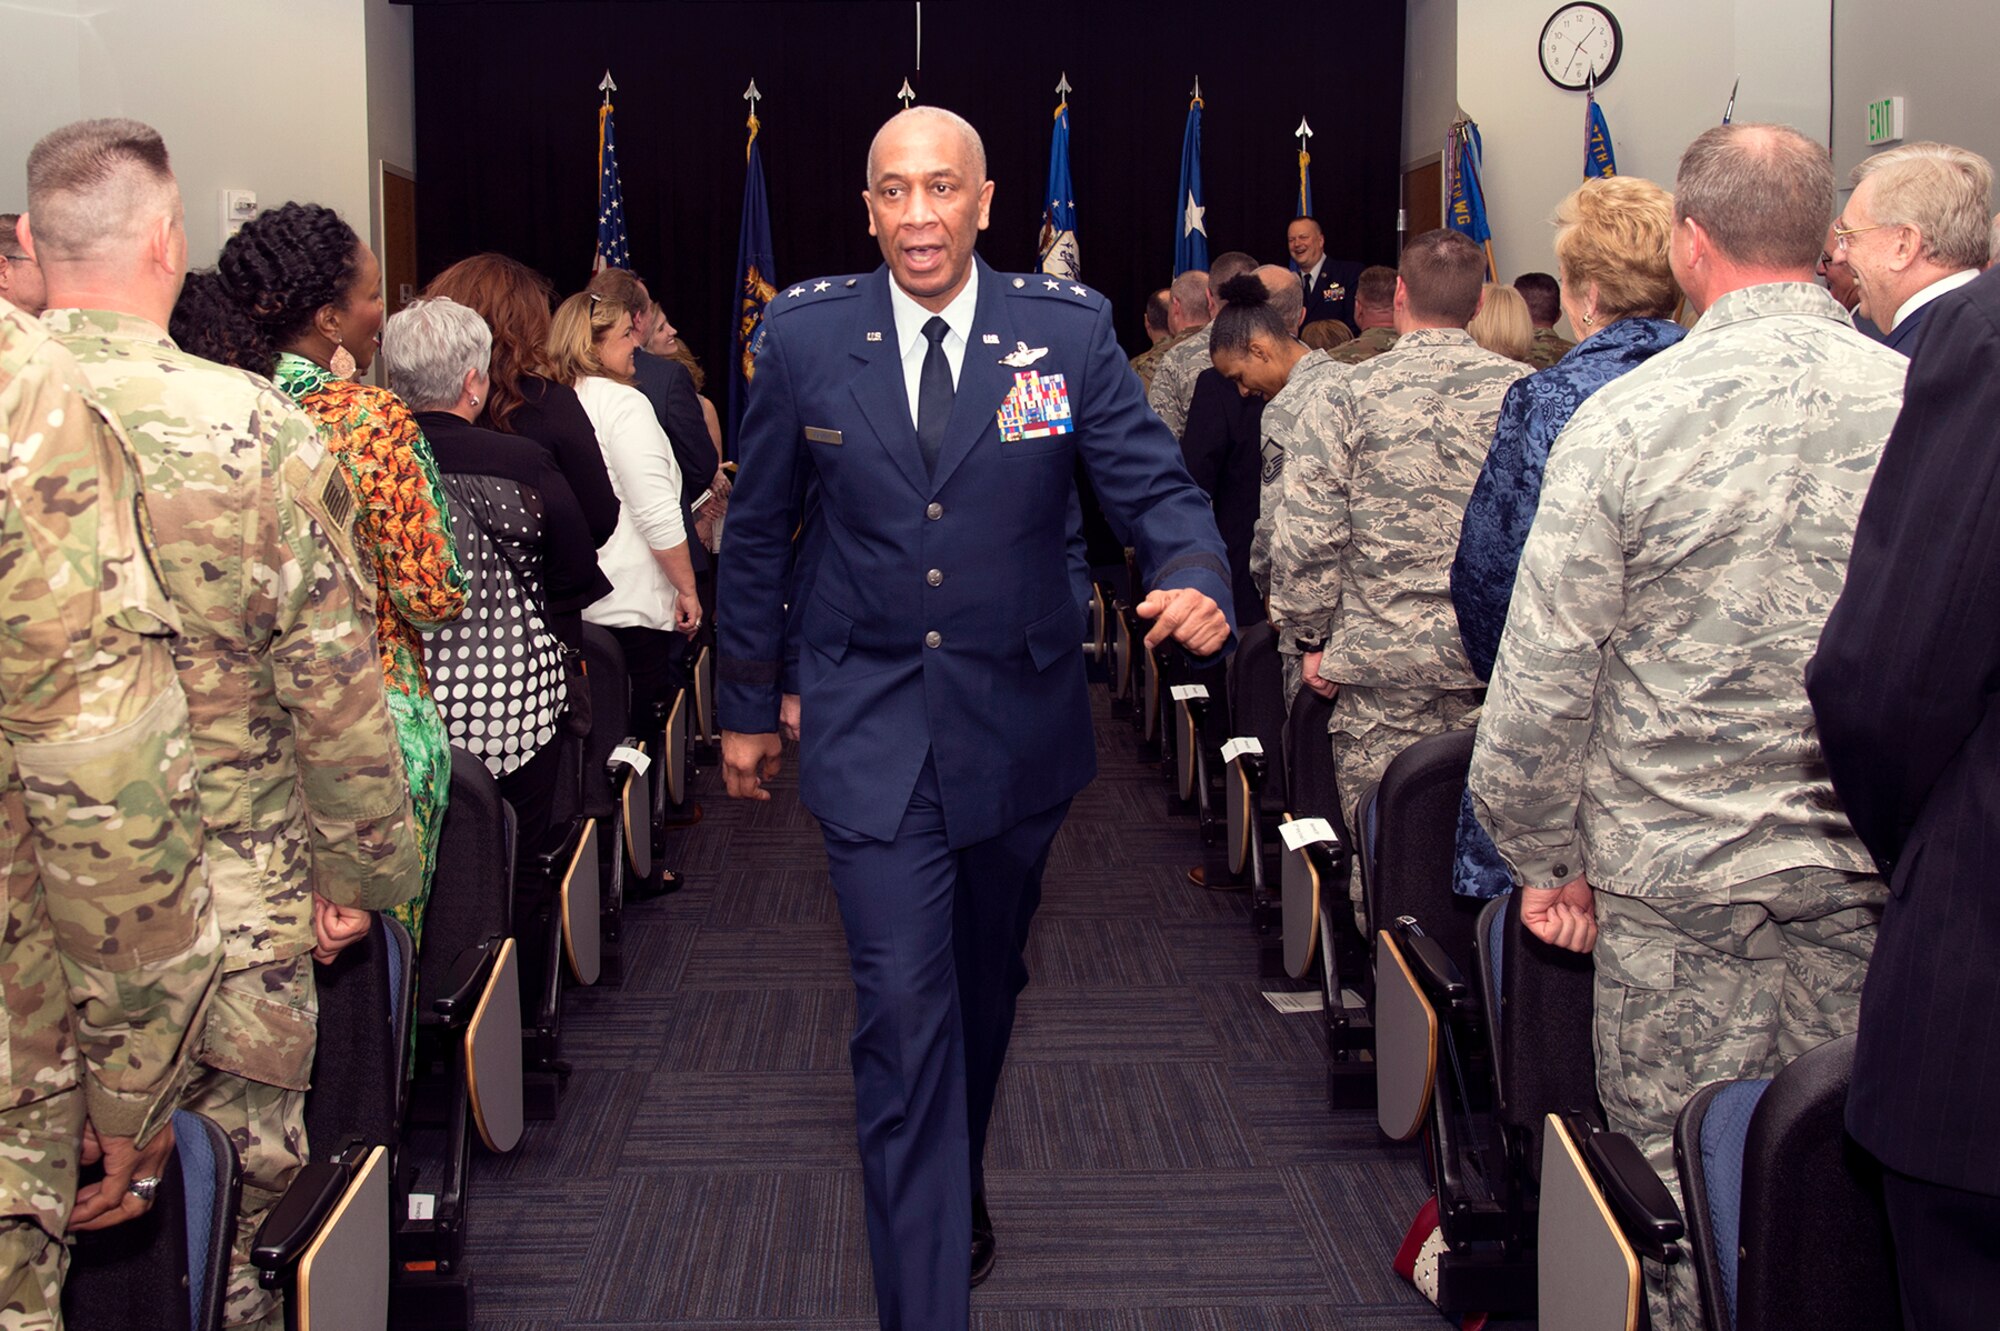 SELFRIDGE AIR NATIONAL GUARD BASE, Mich.— Maj. Gen. Leonard Isabelle, Jr., commander of the Michigan Air National Guard, exits as part of the official party after Brig. Gen. Rolf E. Mammen, commander of the 127th Wing, is promoted from colonel to brigadier general here on May 4, 2019.